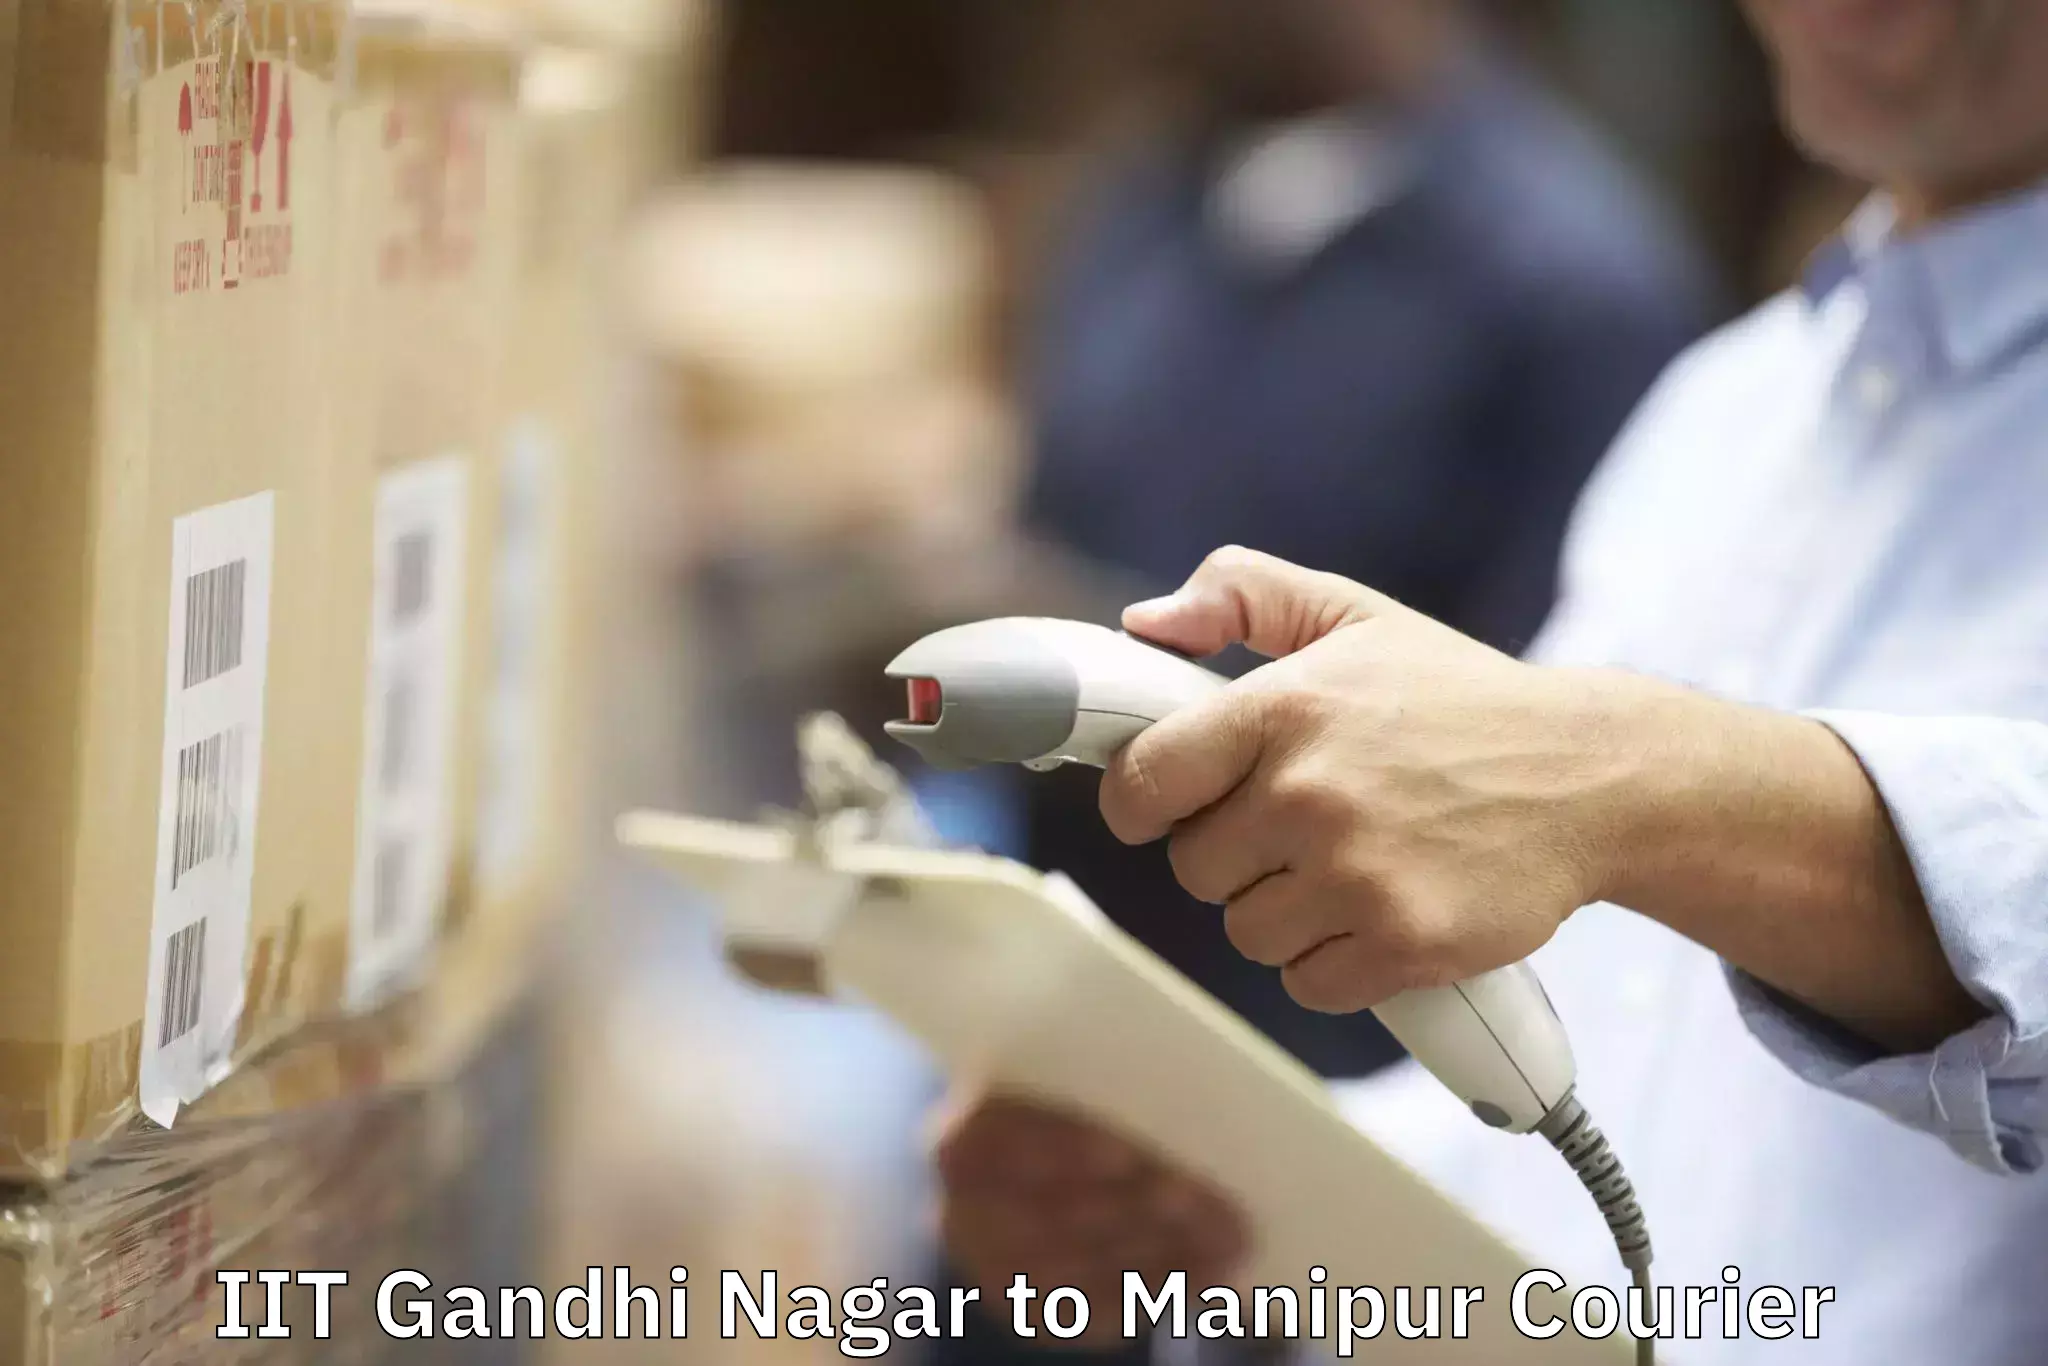 Affordable relocation services IIT Gandhi Nagar to Manipur